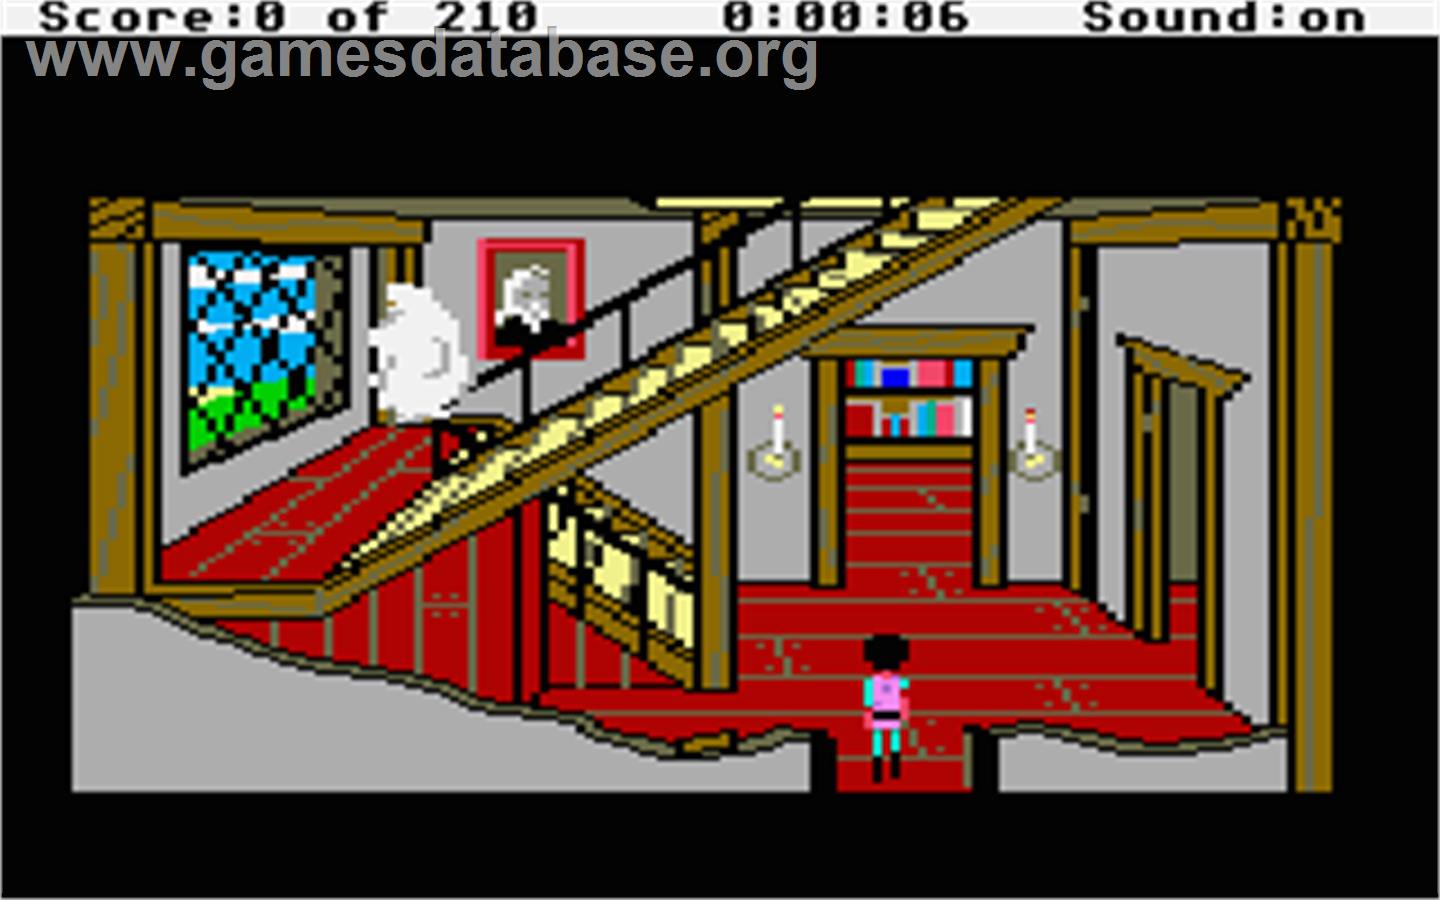 King's Quest III: To Heir is Human - Atari ST - Artwork - In Game